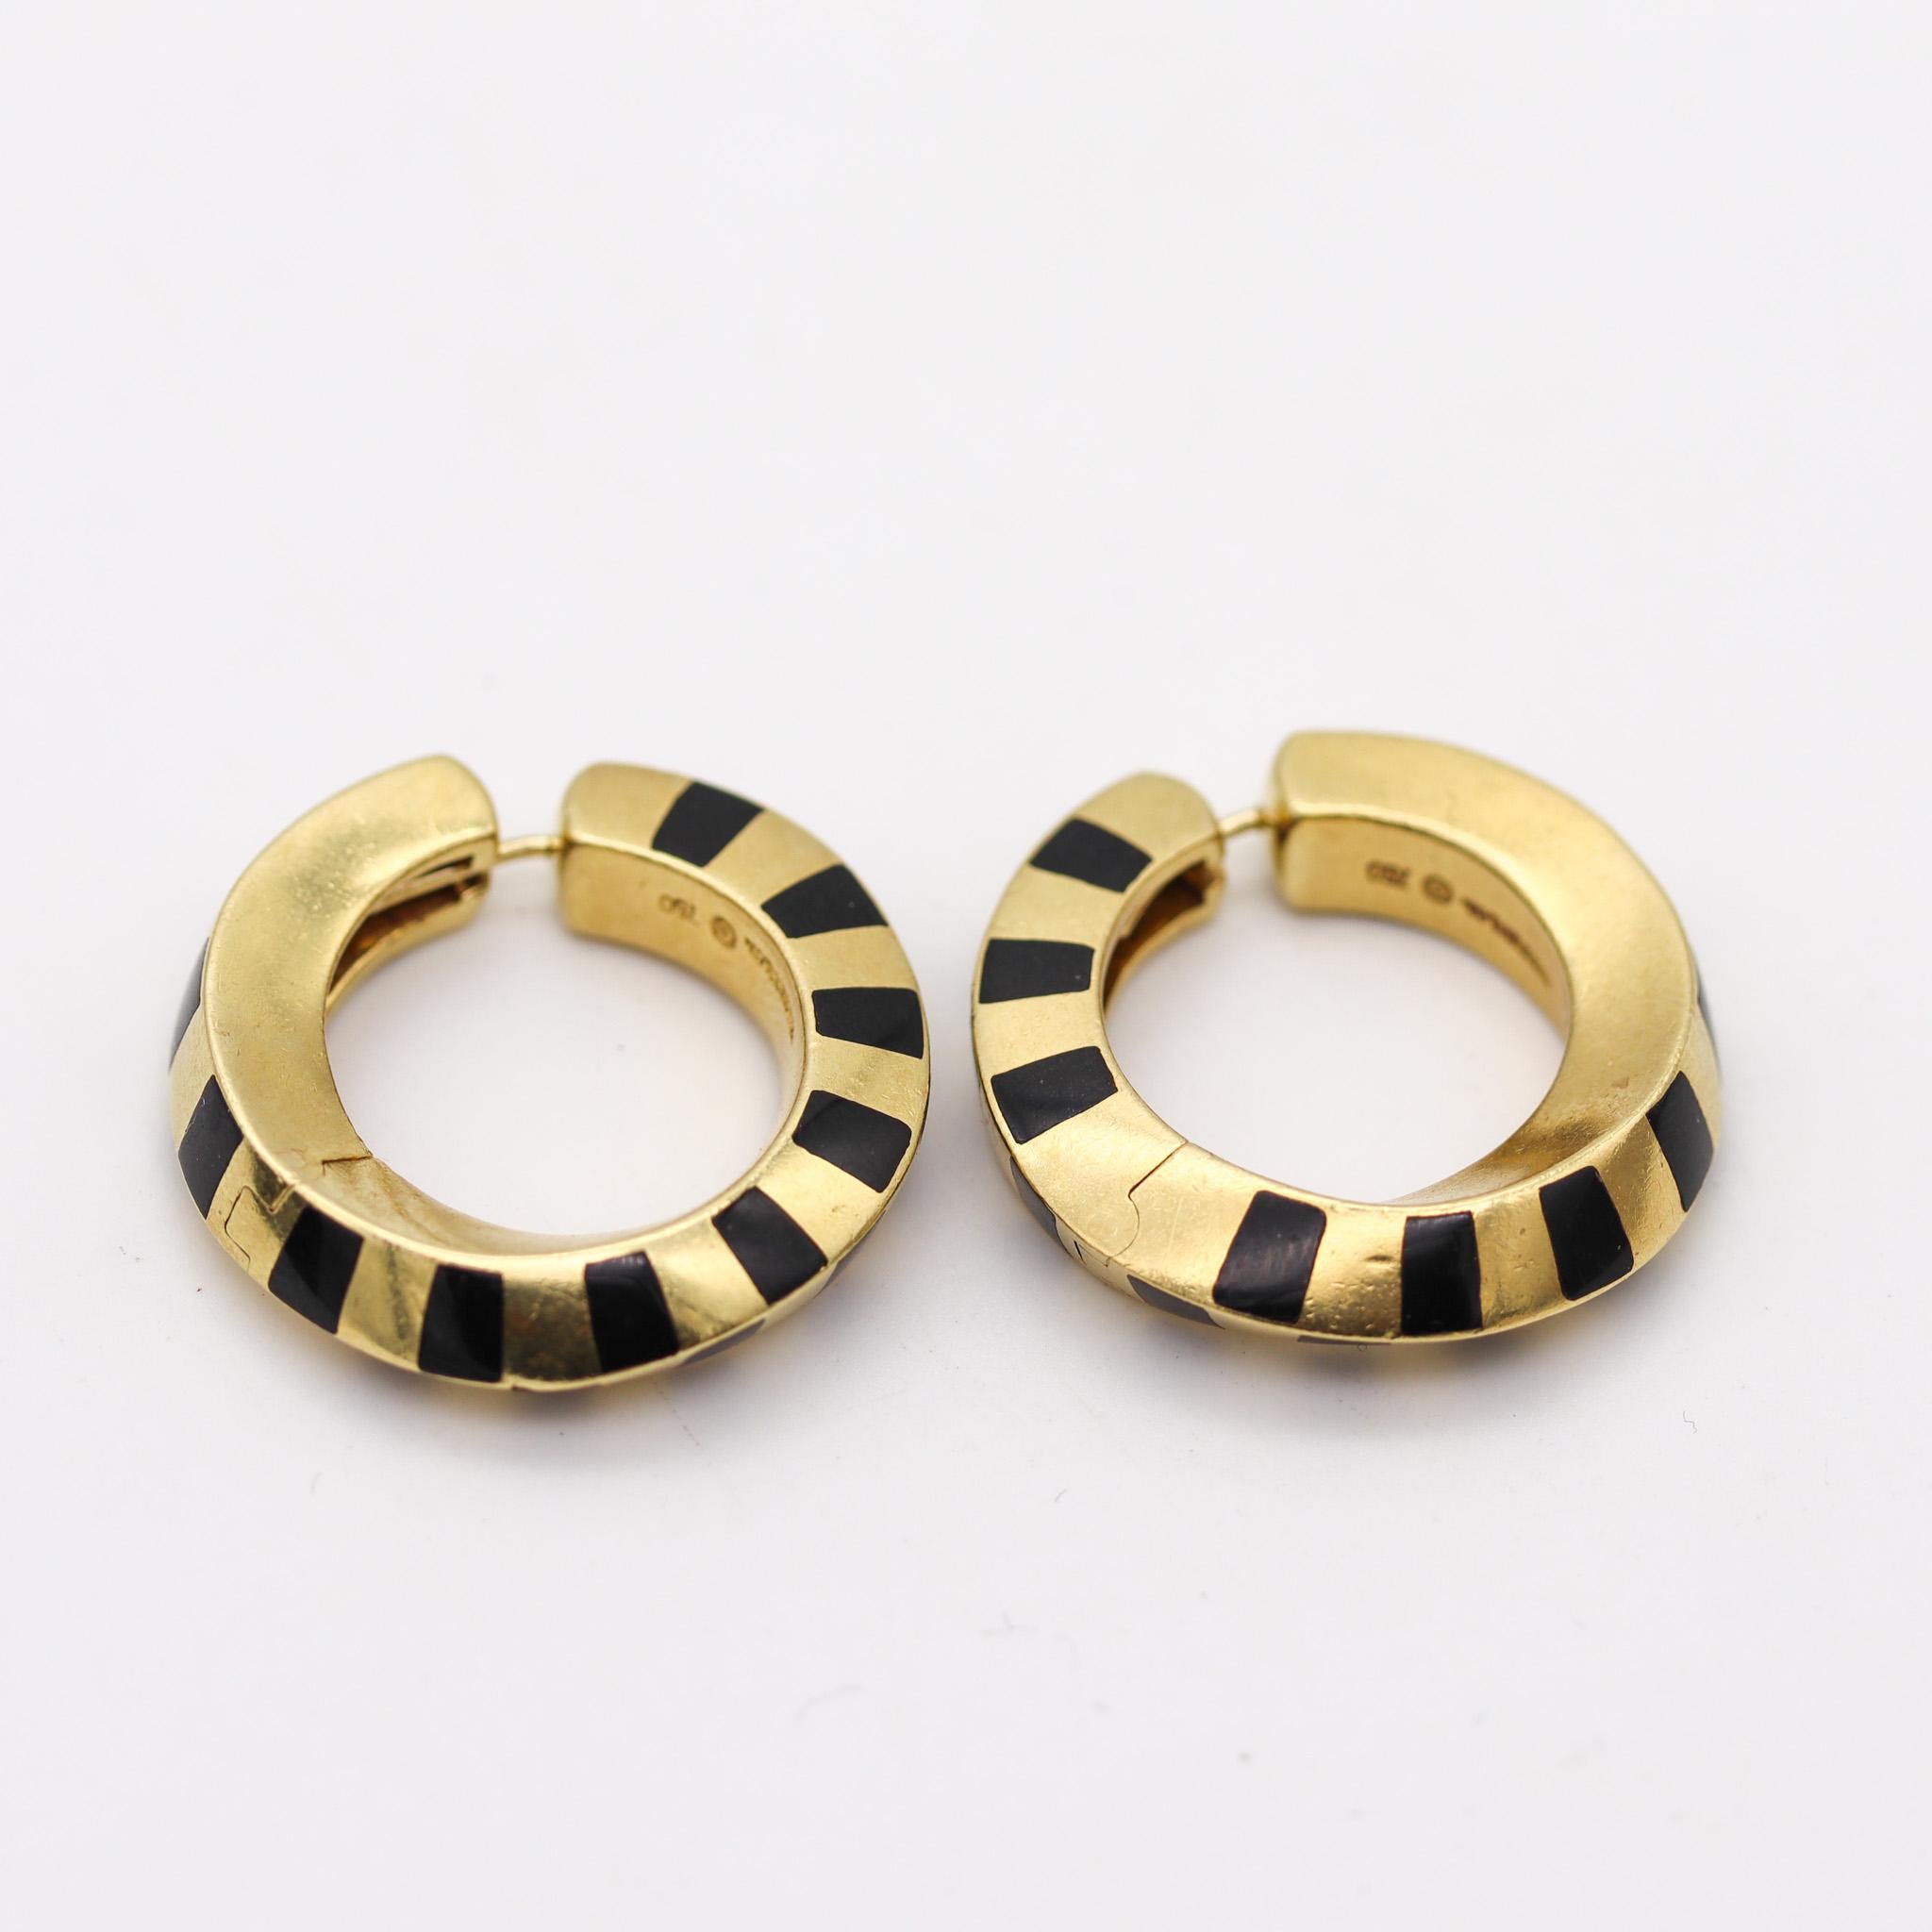 Hoops earrings designed by Angela Cummings for Tiffany & Co.

Very rare sculptural hoops earrings, created in New York city by Angela Cummings for the Tiffany Studios, back in the 1977. This innovative pair is one of the very early wearable